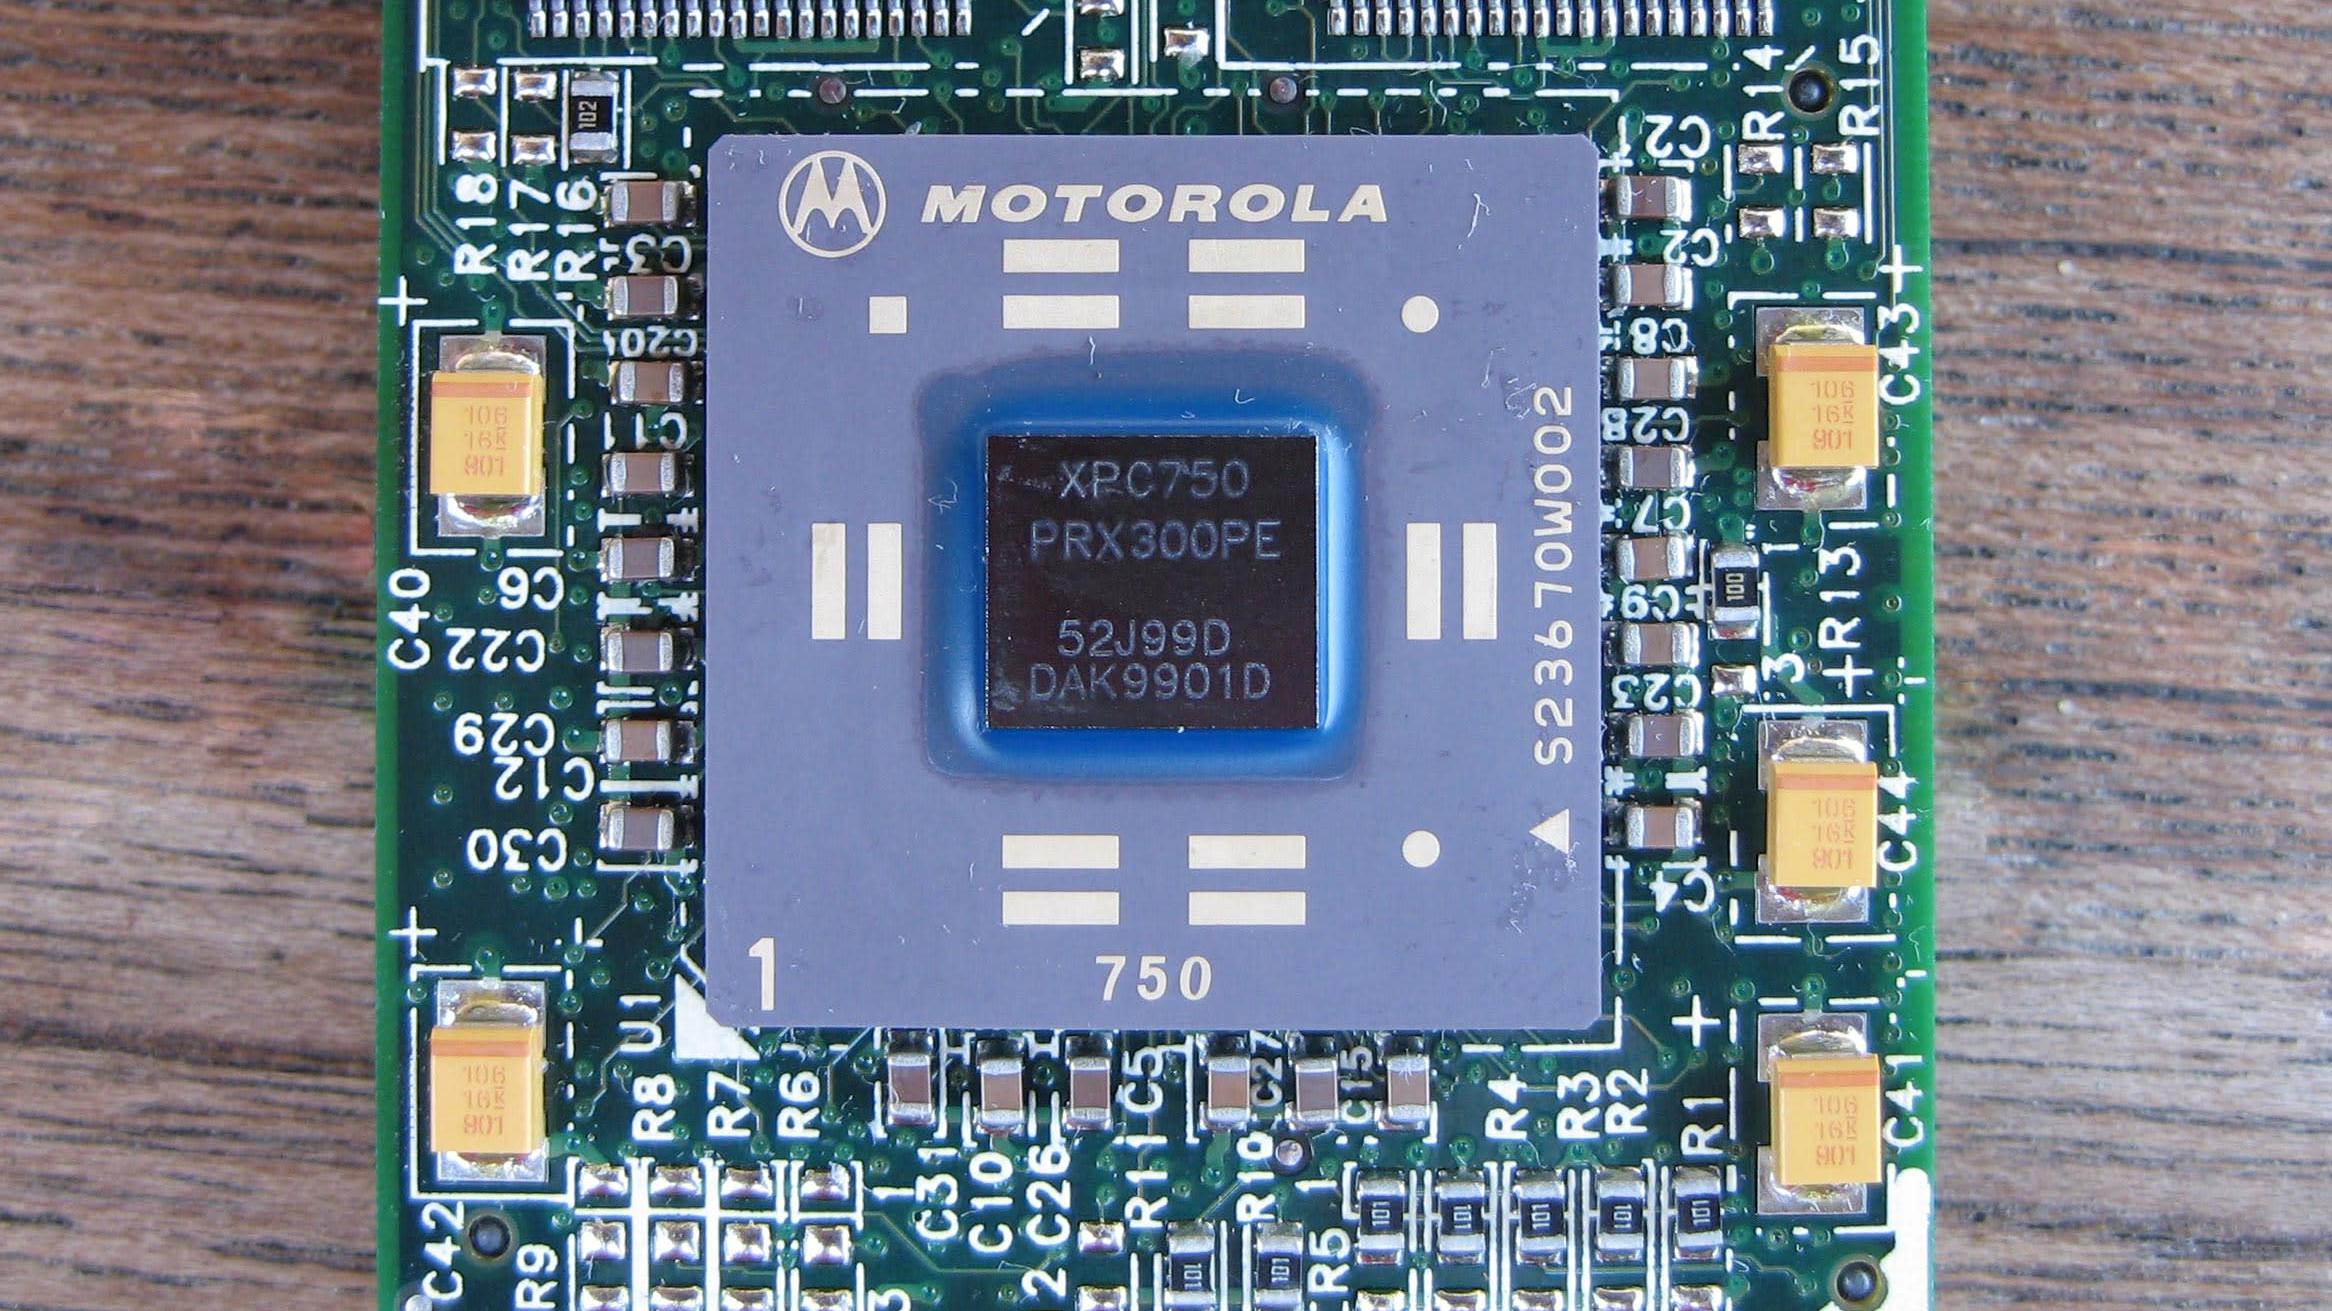 Motorola PowerPC 750 processor with off-die L2 cache on the CPU module from a Power Mac G3. (Photo: Henrik Wannheden, Other)